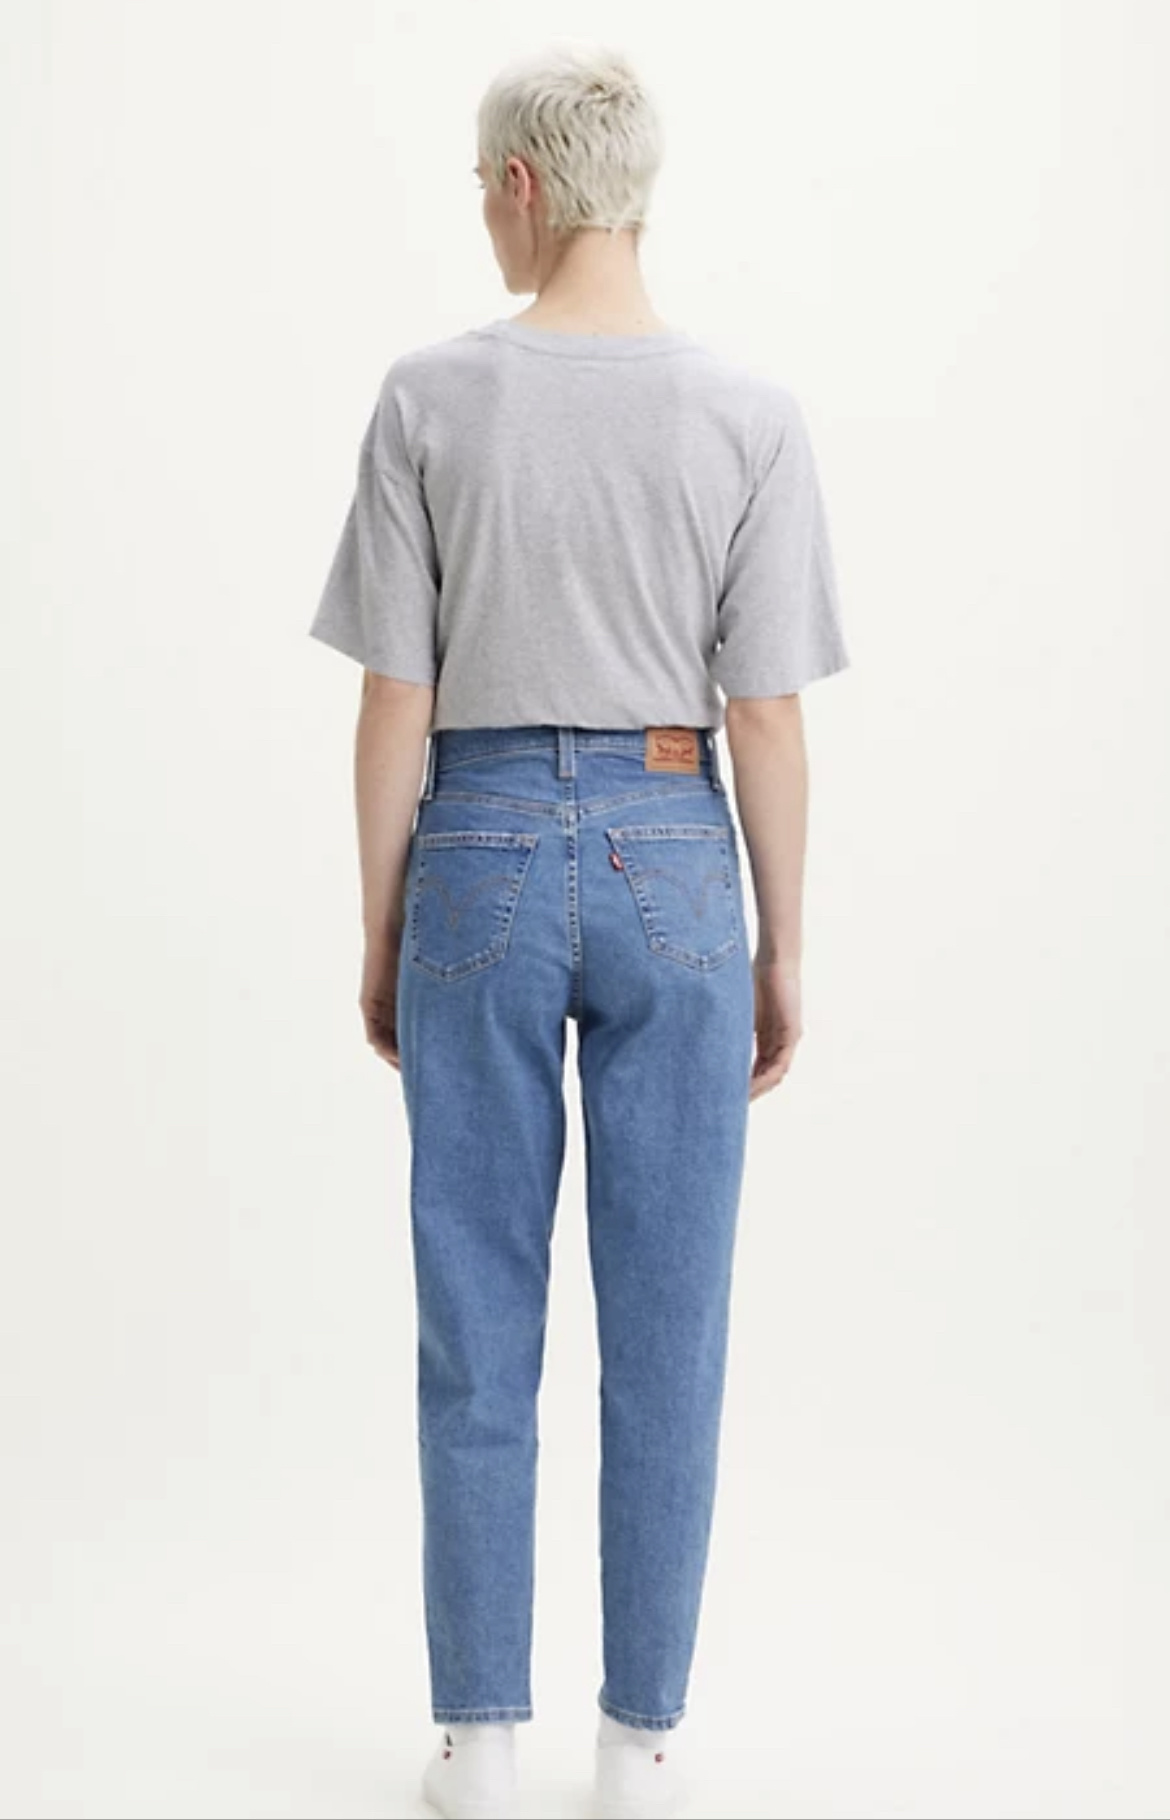 Levi Strauss & Co. High Wasted Mom Jean, Summer Games